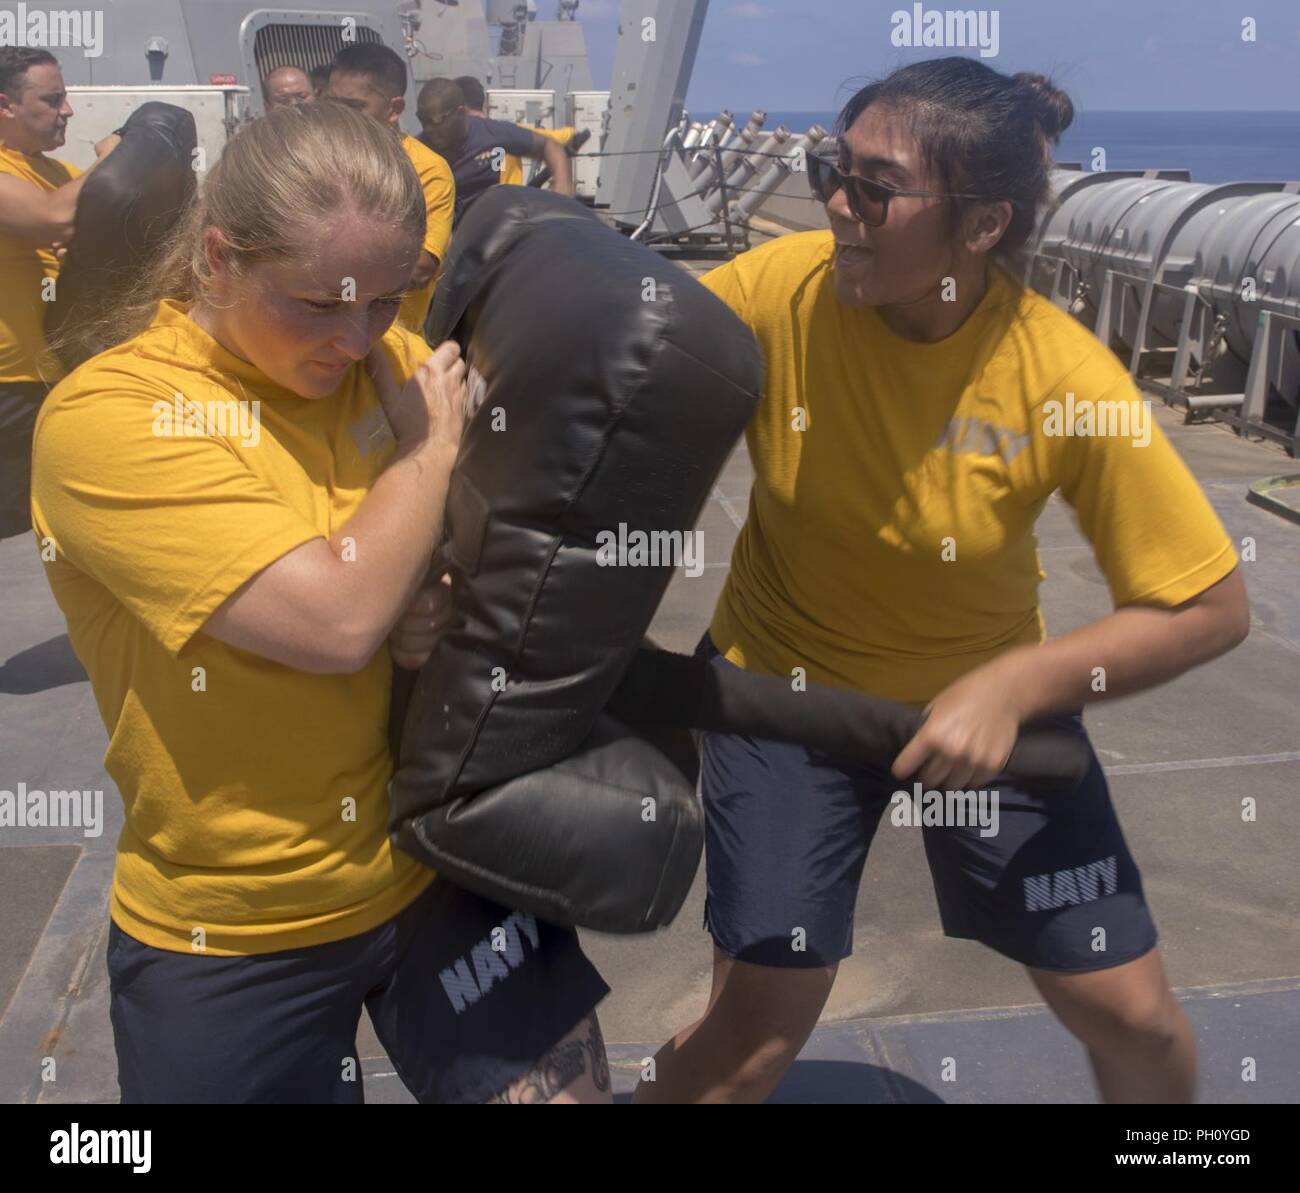 MEDITERRANEAN SEA (June 21, 2018) Ensign Genelle Arandia, from Gainesville, Florida, and Ensign Jenna Padgett, from Live Oak, Florida, practice proper baton use during security reaction force basic training aboard the San Antonio-class amphibious transport dock ship USS New York (LPD 21) June 21, 2018. New York, homeported in Mayport, Florida, is conducting naval operations in the U.S. 6th Fleet area of operations in support of U.S. national security interests in Europe and Africa. Stock Photo